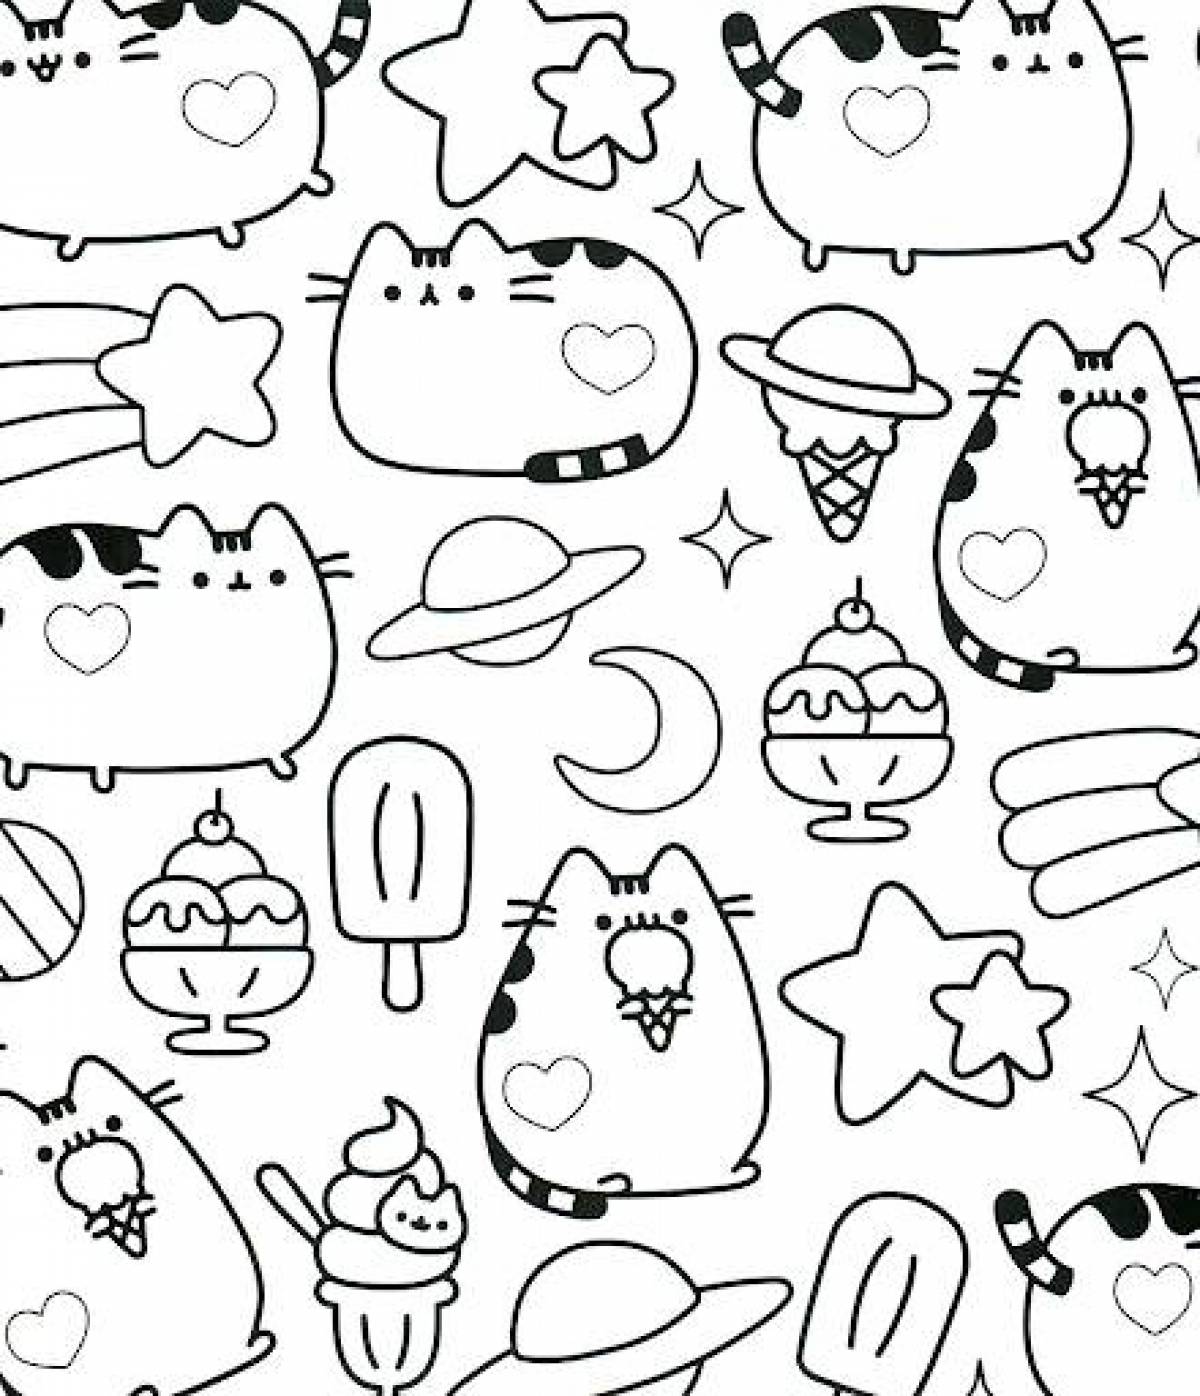 Pusheen cat coloring pages